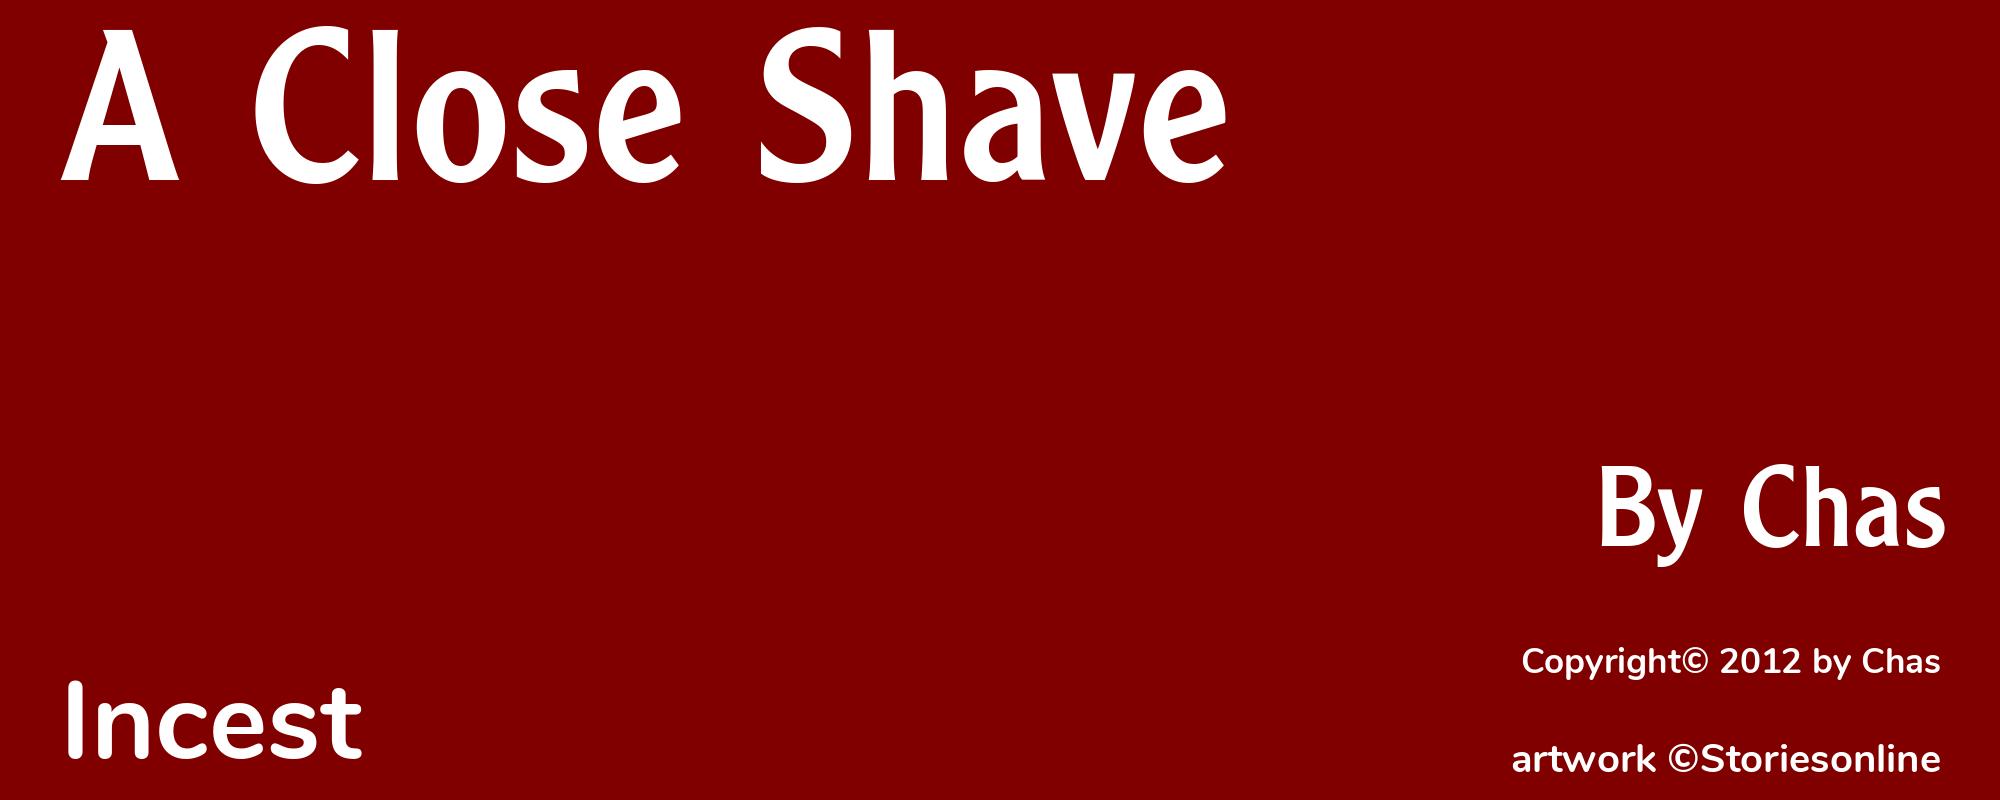 A Close Shave - Cover